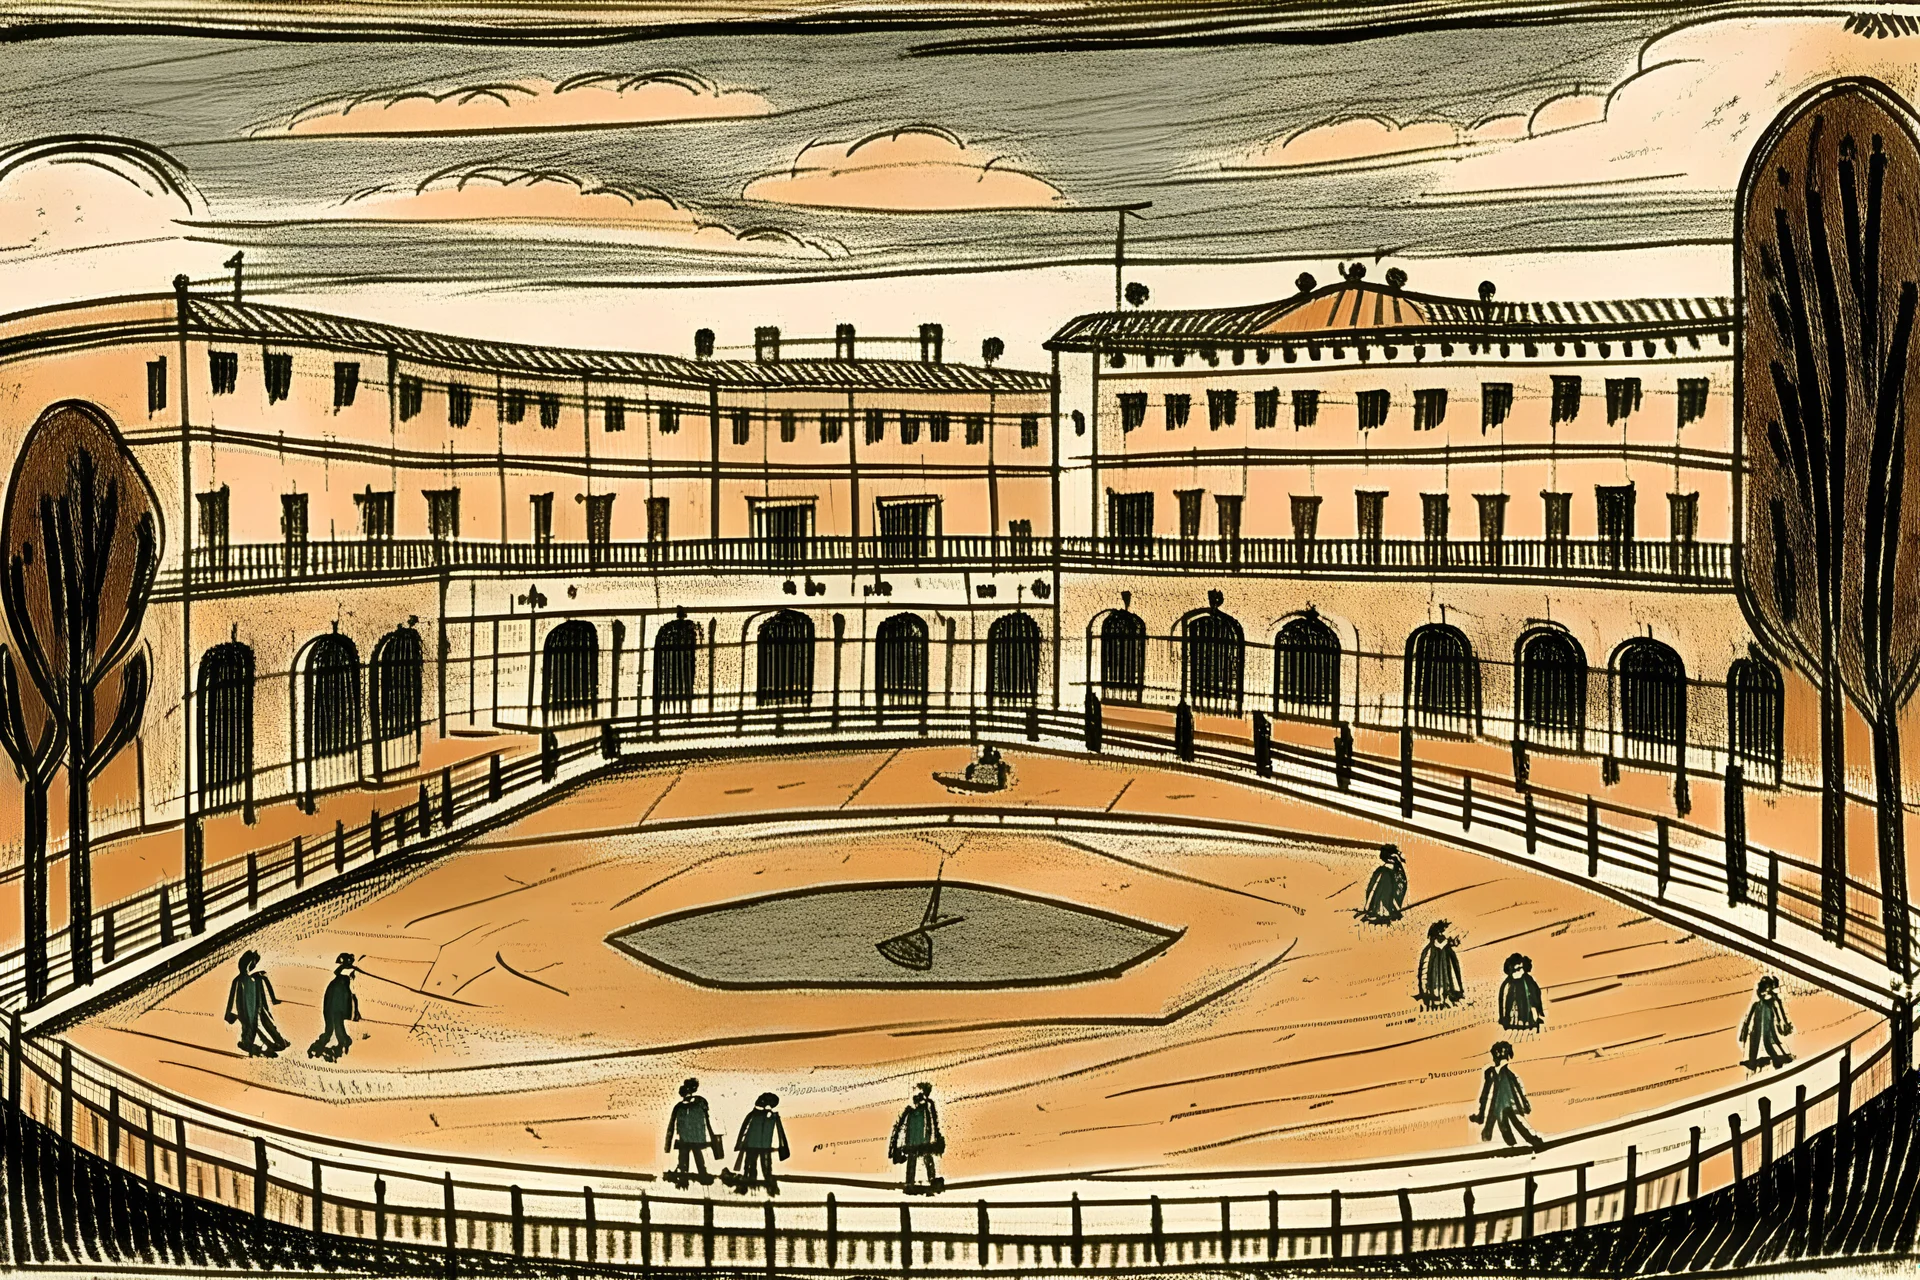 A light brown fighter's stadium painted by Pablo Picasso